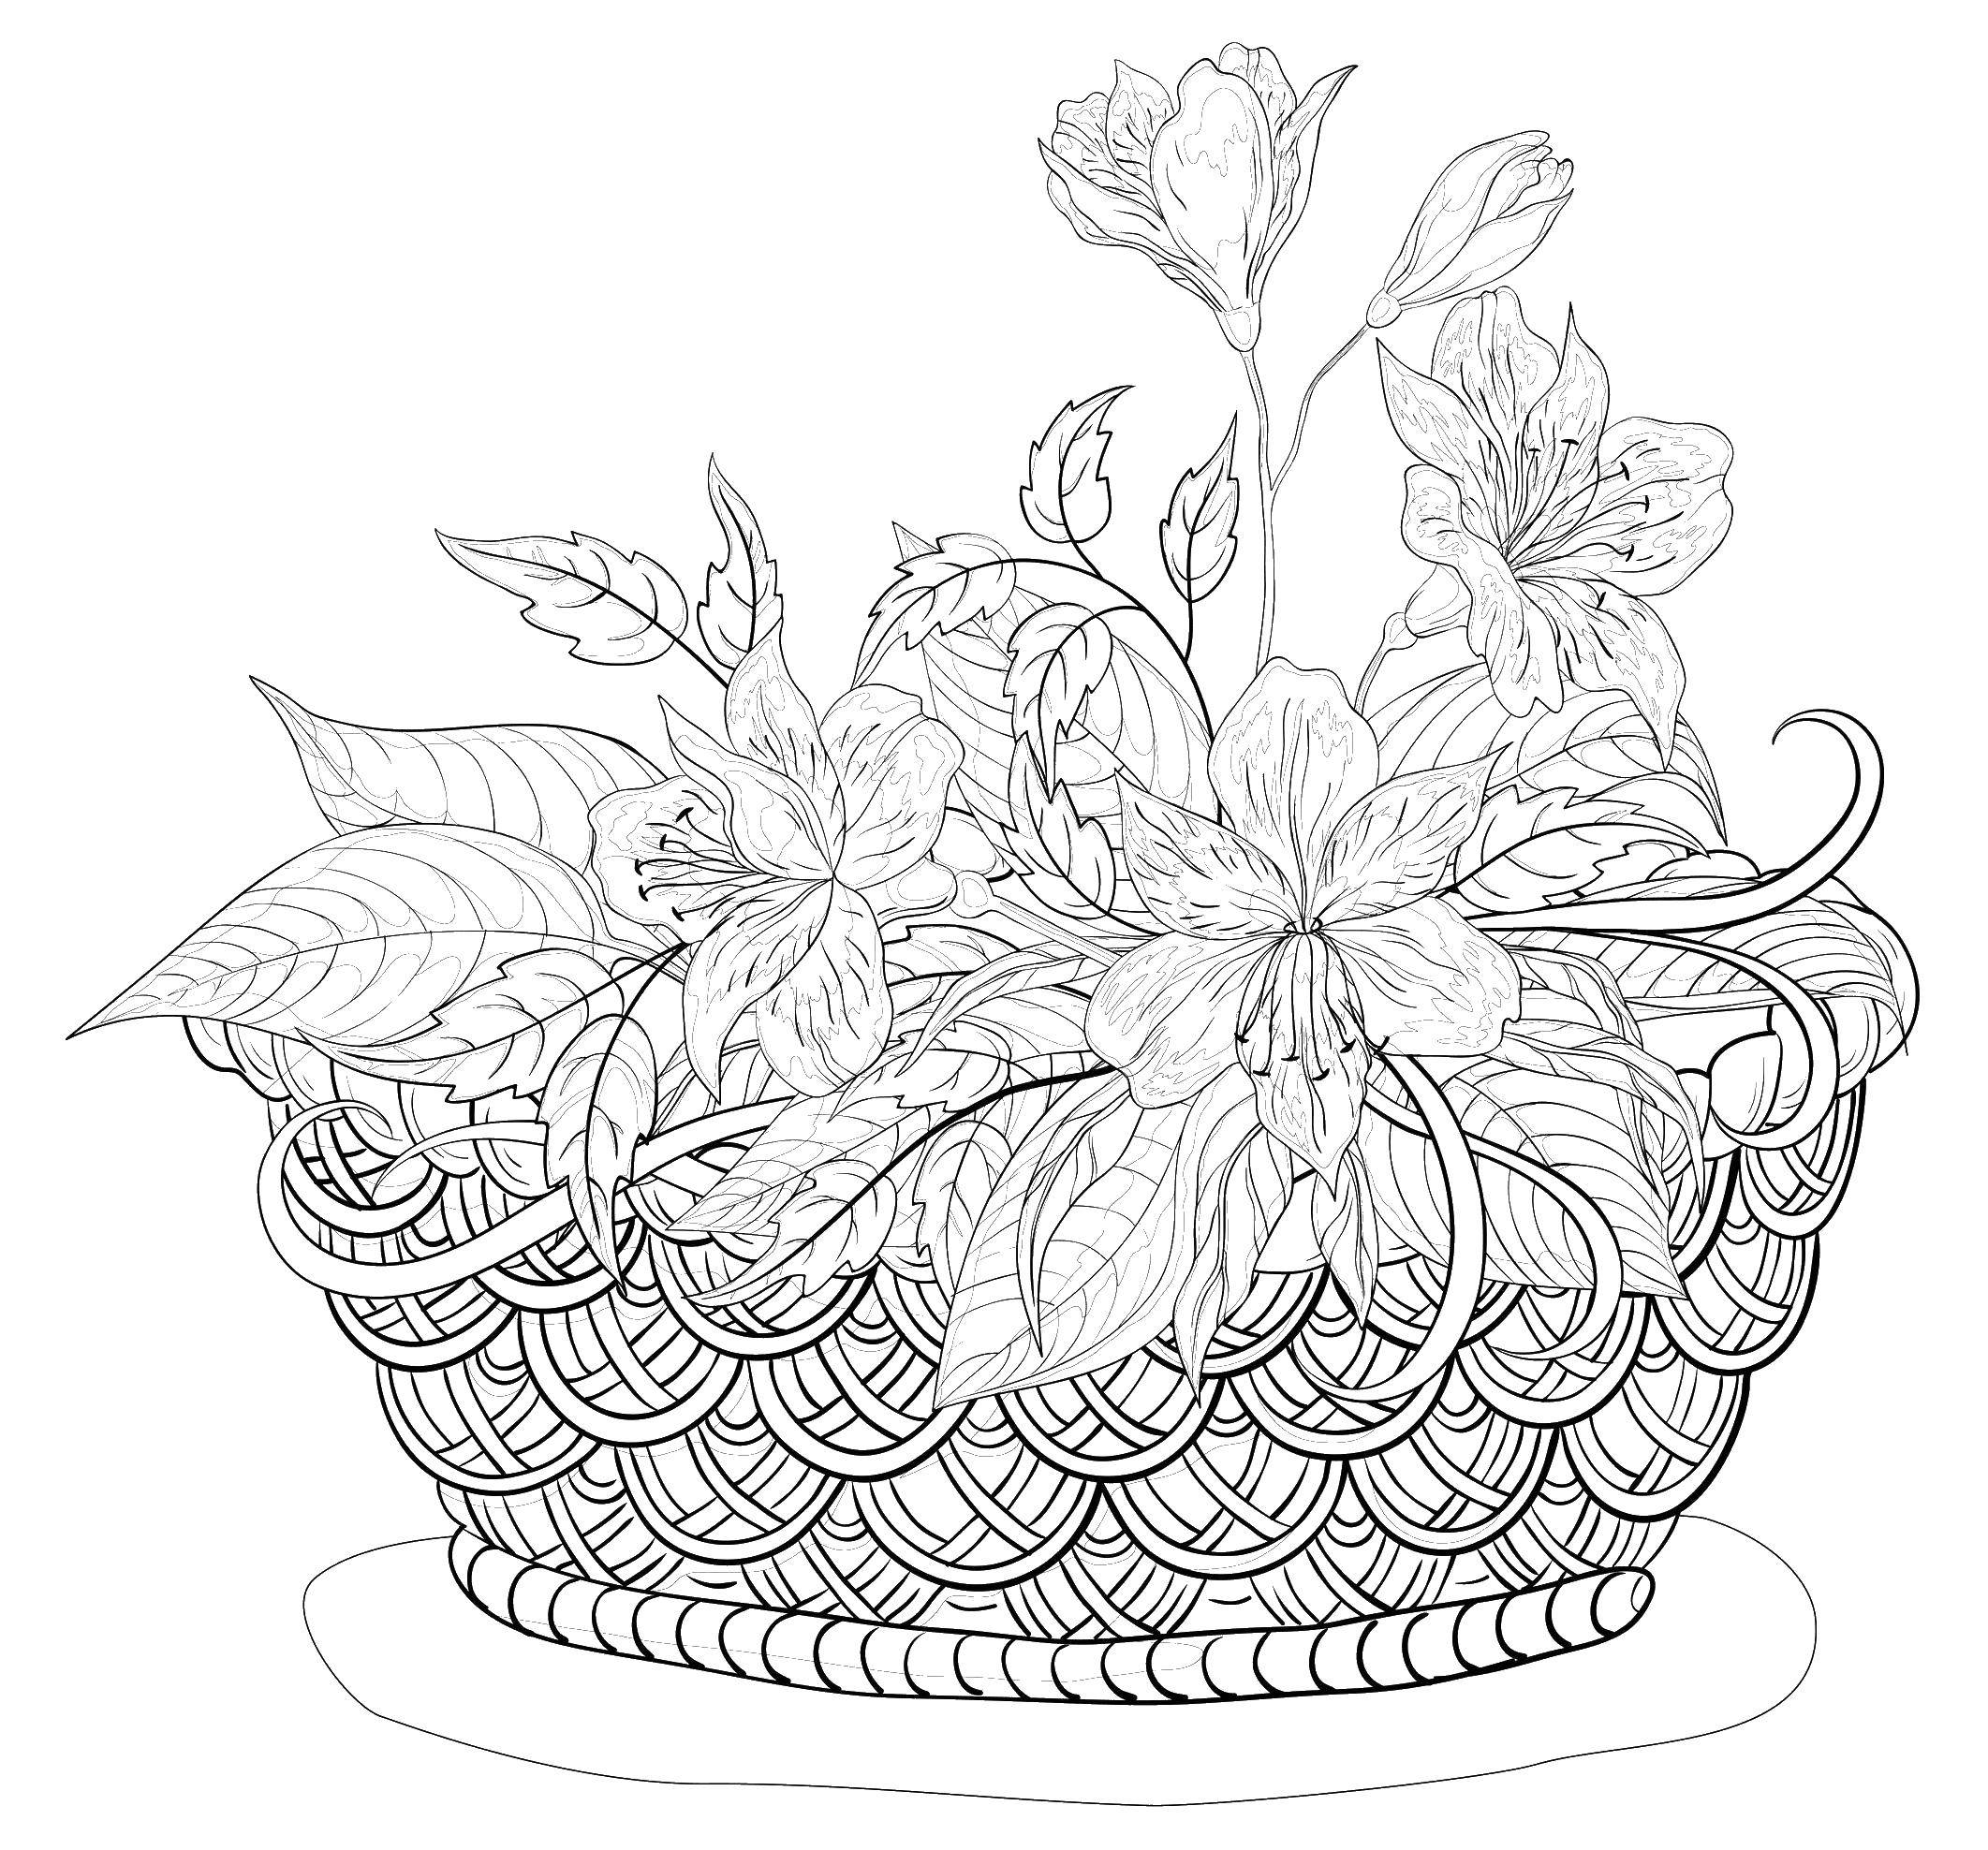 Coloring Basket of flowers. Category coloring for adults. Tags:  for adults, antistress, patterns.